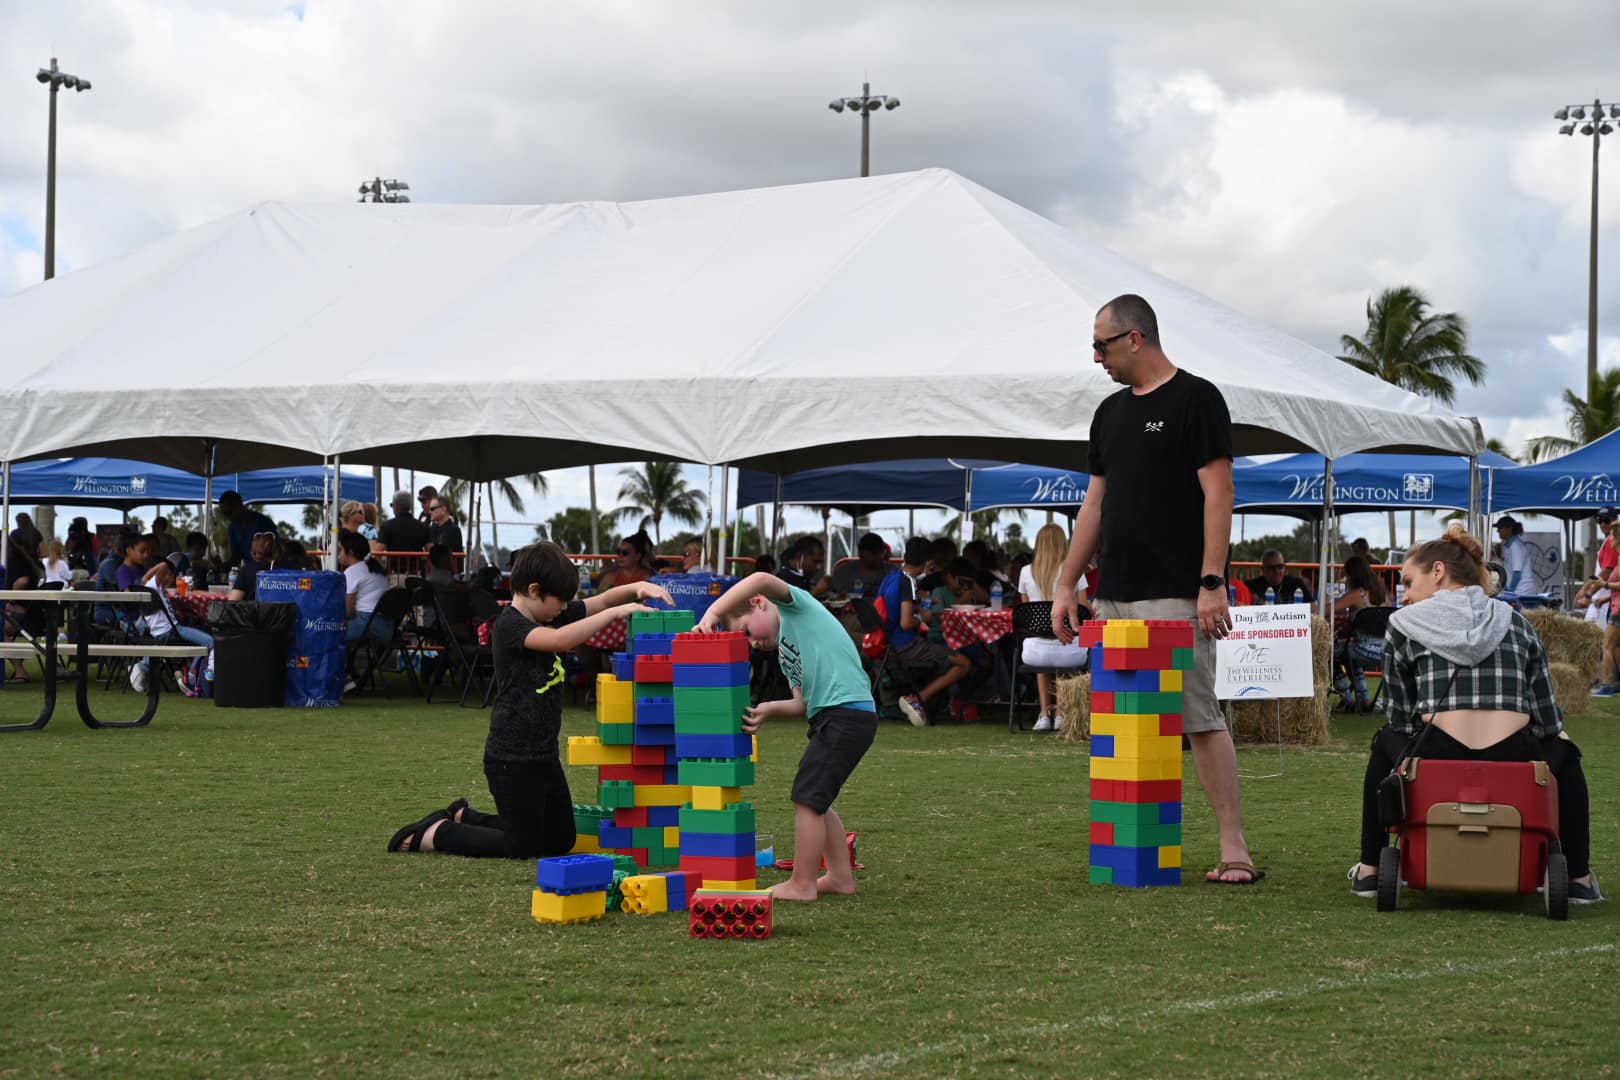 We had an amazing time at the Day For Autism event in Wellington. We thank all families who came out and joined us.